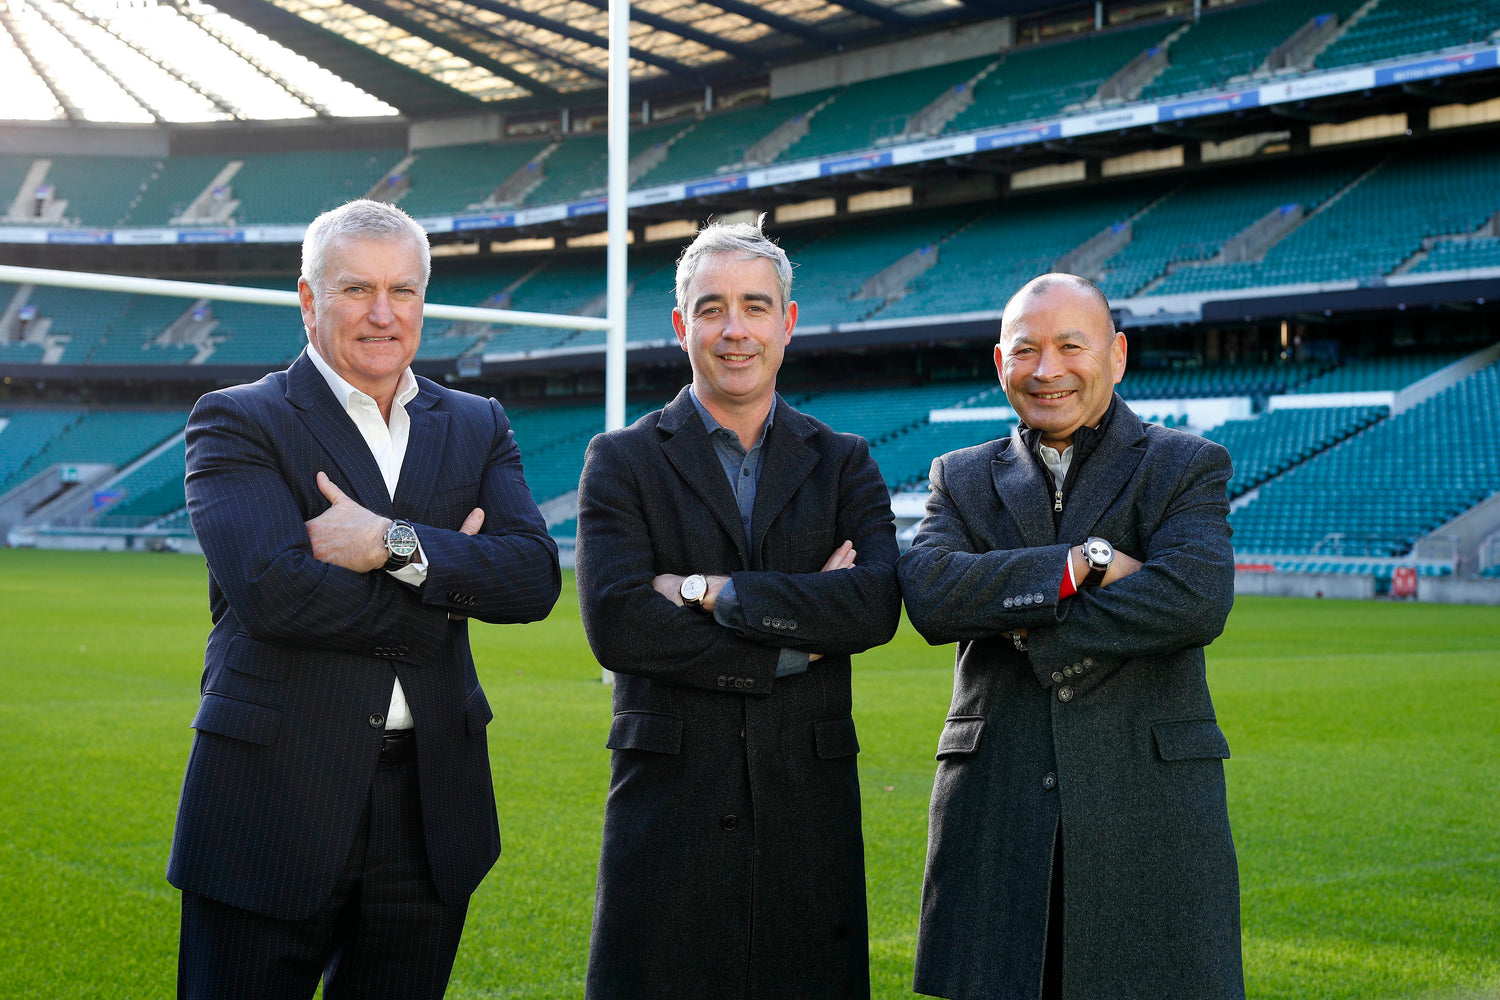 MADE IN ENGLAND: BREMONT TO BECOME OFFICIAL TIMEKEEPER OF ENGLAND RUGBY